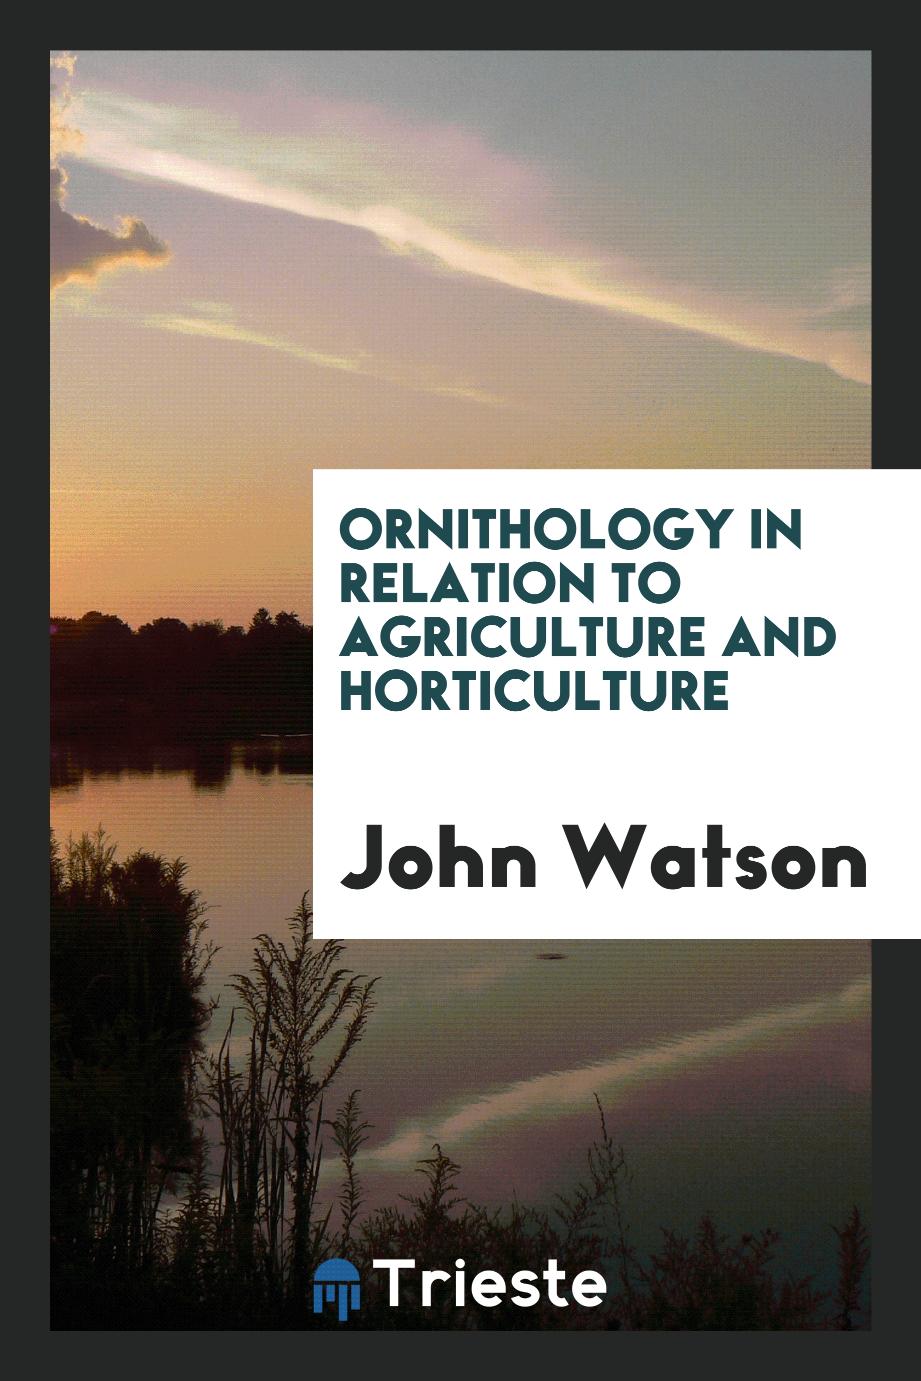 Ornithology in Relation to Agriculture and Horticulture